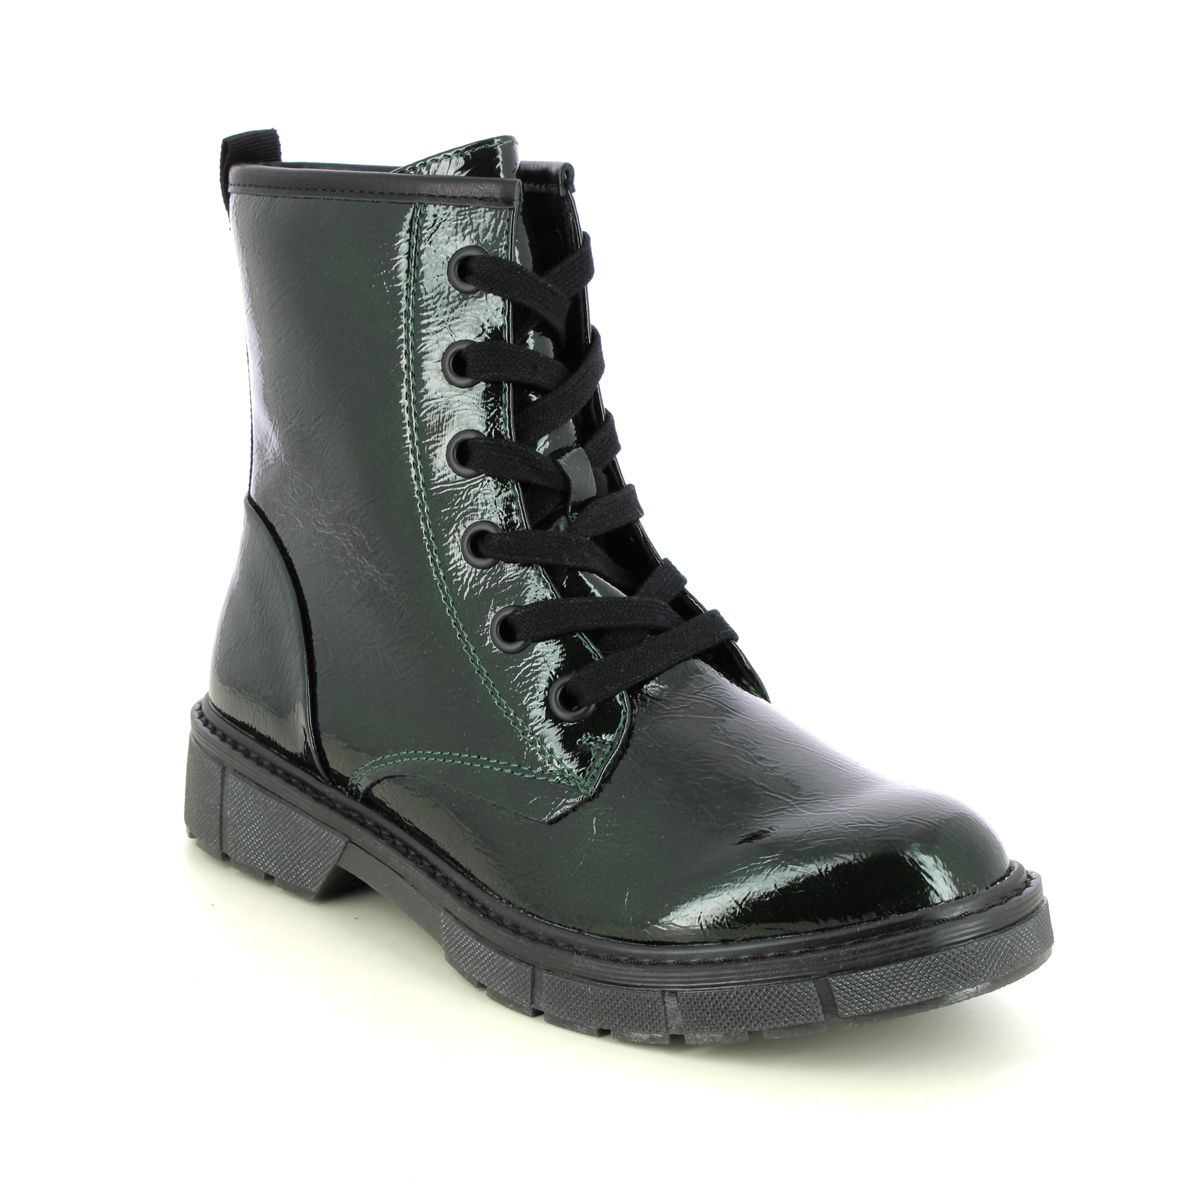 Marco Tozzi Badie  Lace Green Patent Womens Biker Boots 25282-41-789 In Size 39 In Plain Green Patent